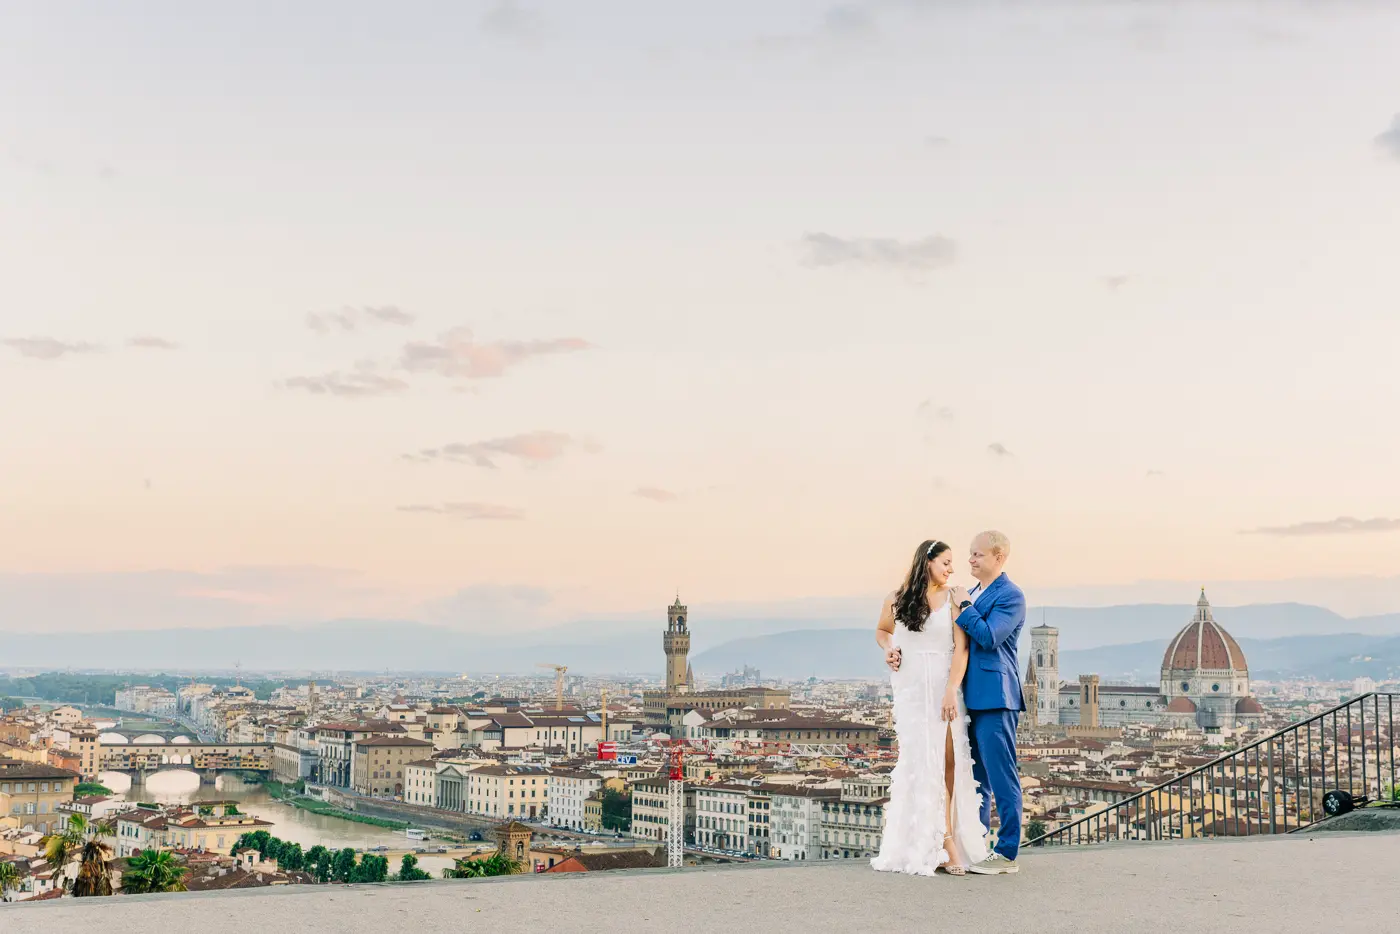 Pre-wedding photo with a Florence overview from Piazzale Michelangelo and flying bird